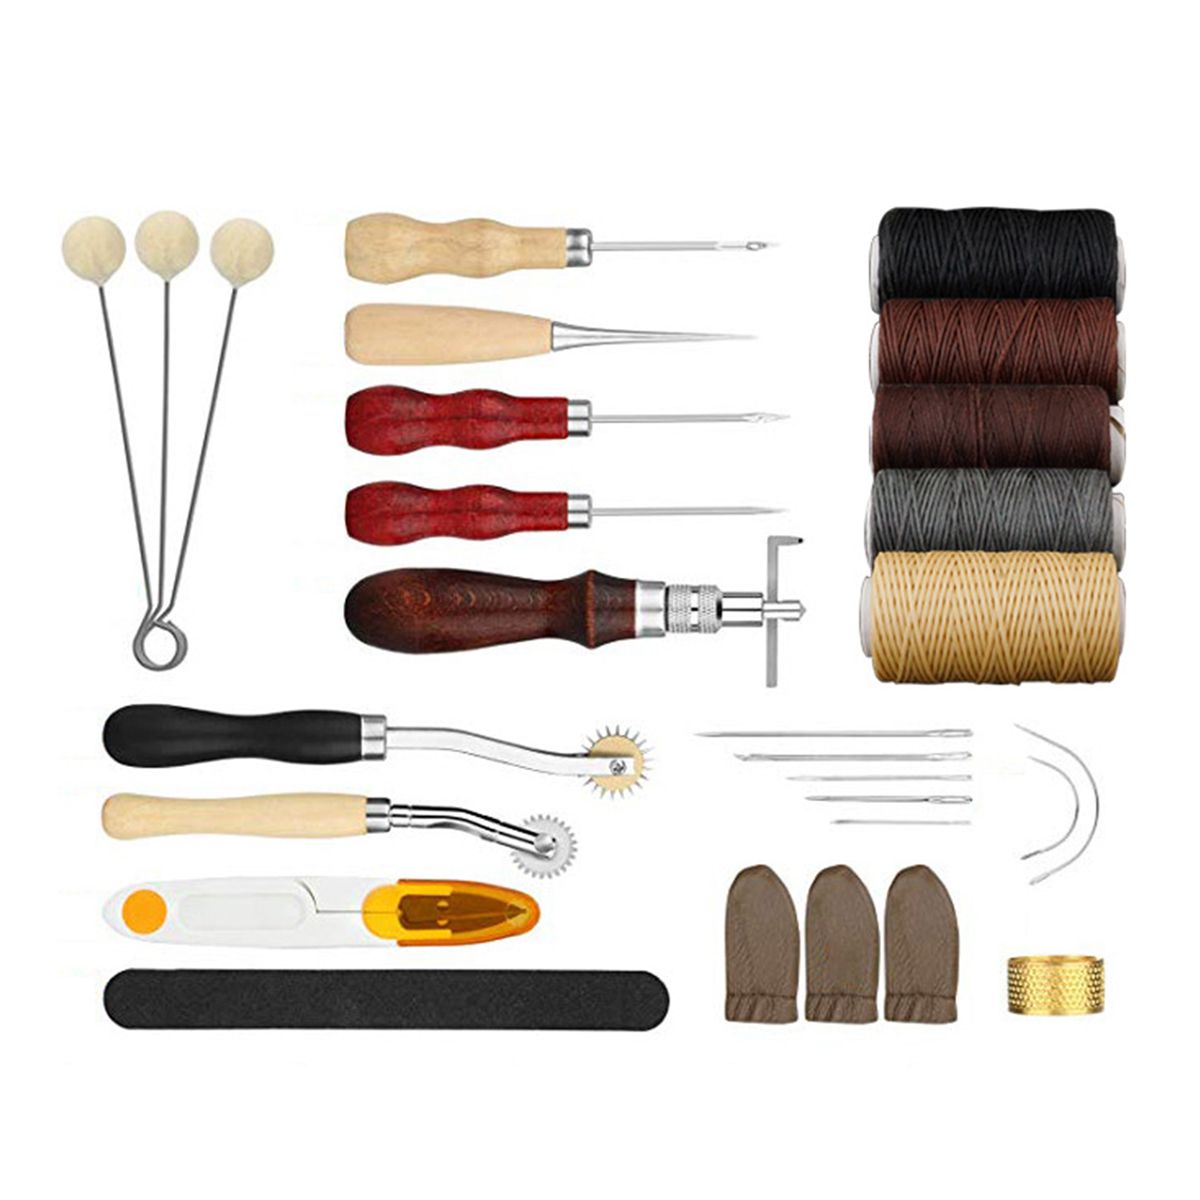 Leather-Craft-Tools-Kit-Hand-Sewing-Stitching-Punch-Carving-Saddle-Rivets-Tool-1626103